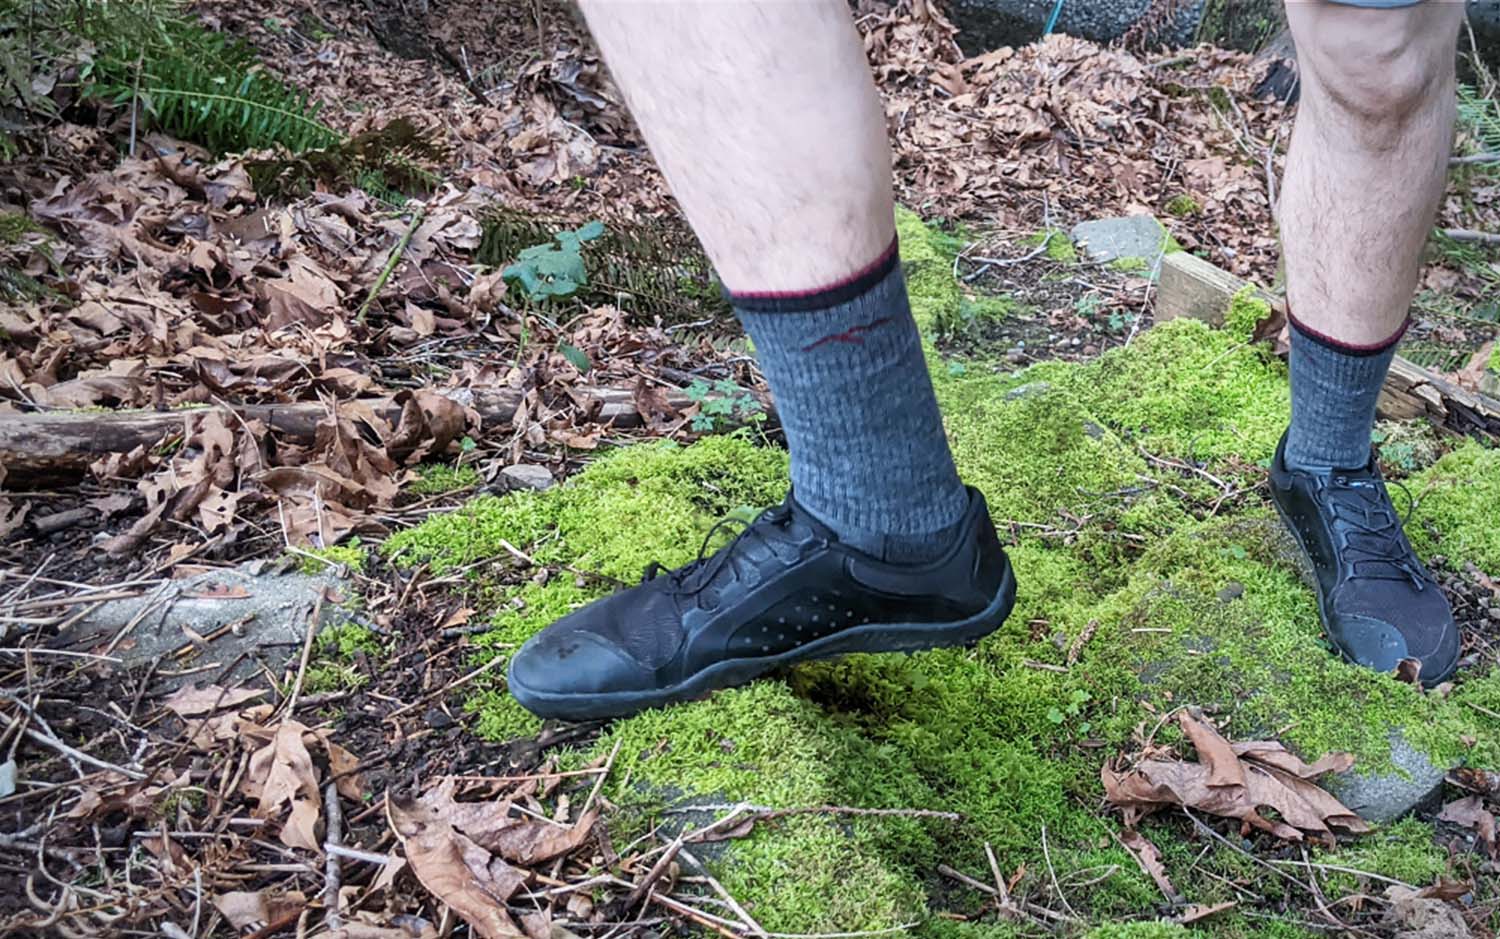 A man's legs with a close up of grey hiking socks